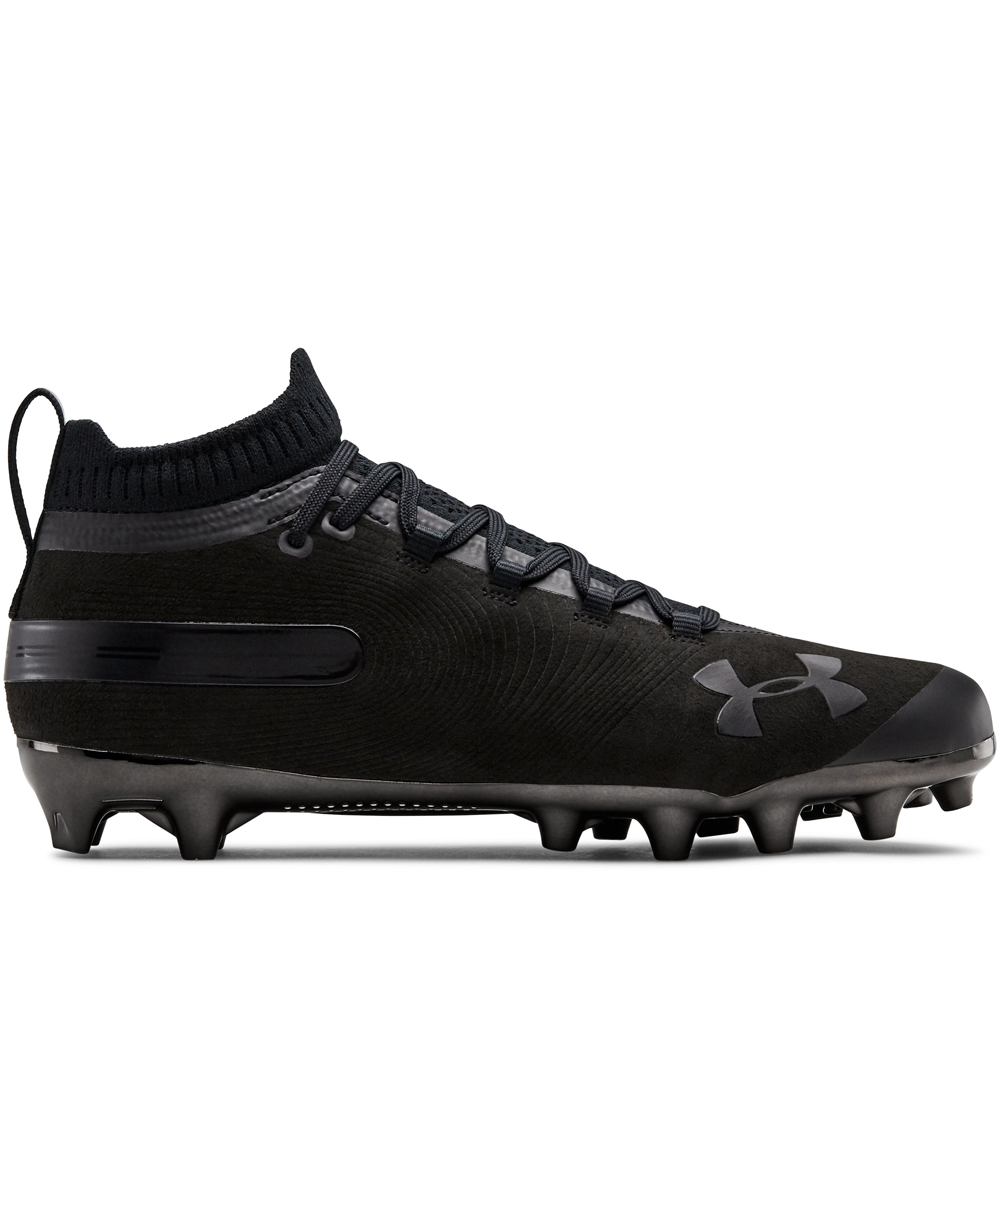 black under armour cleats off 53% - www 